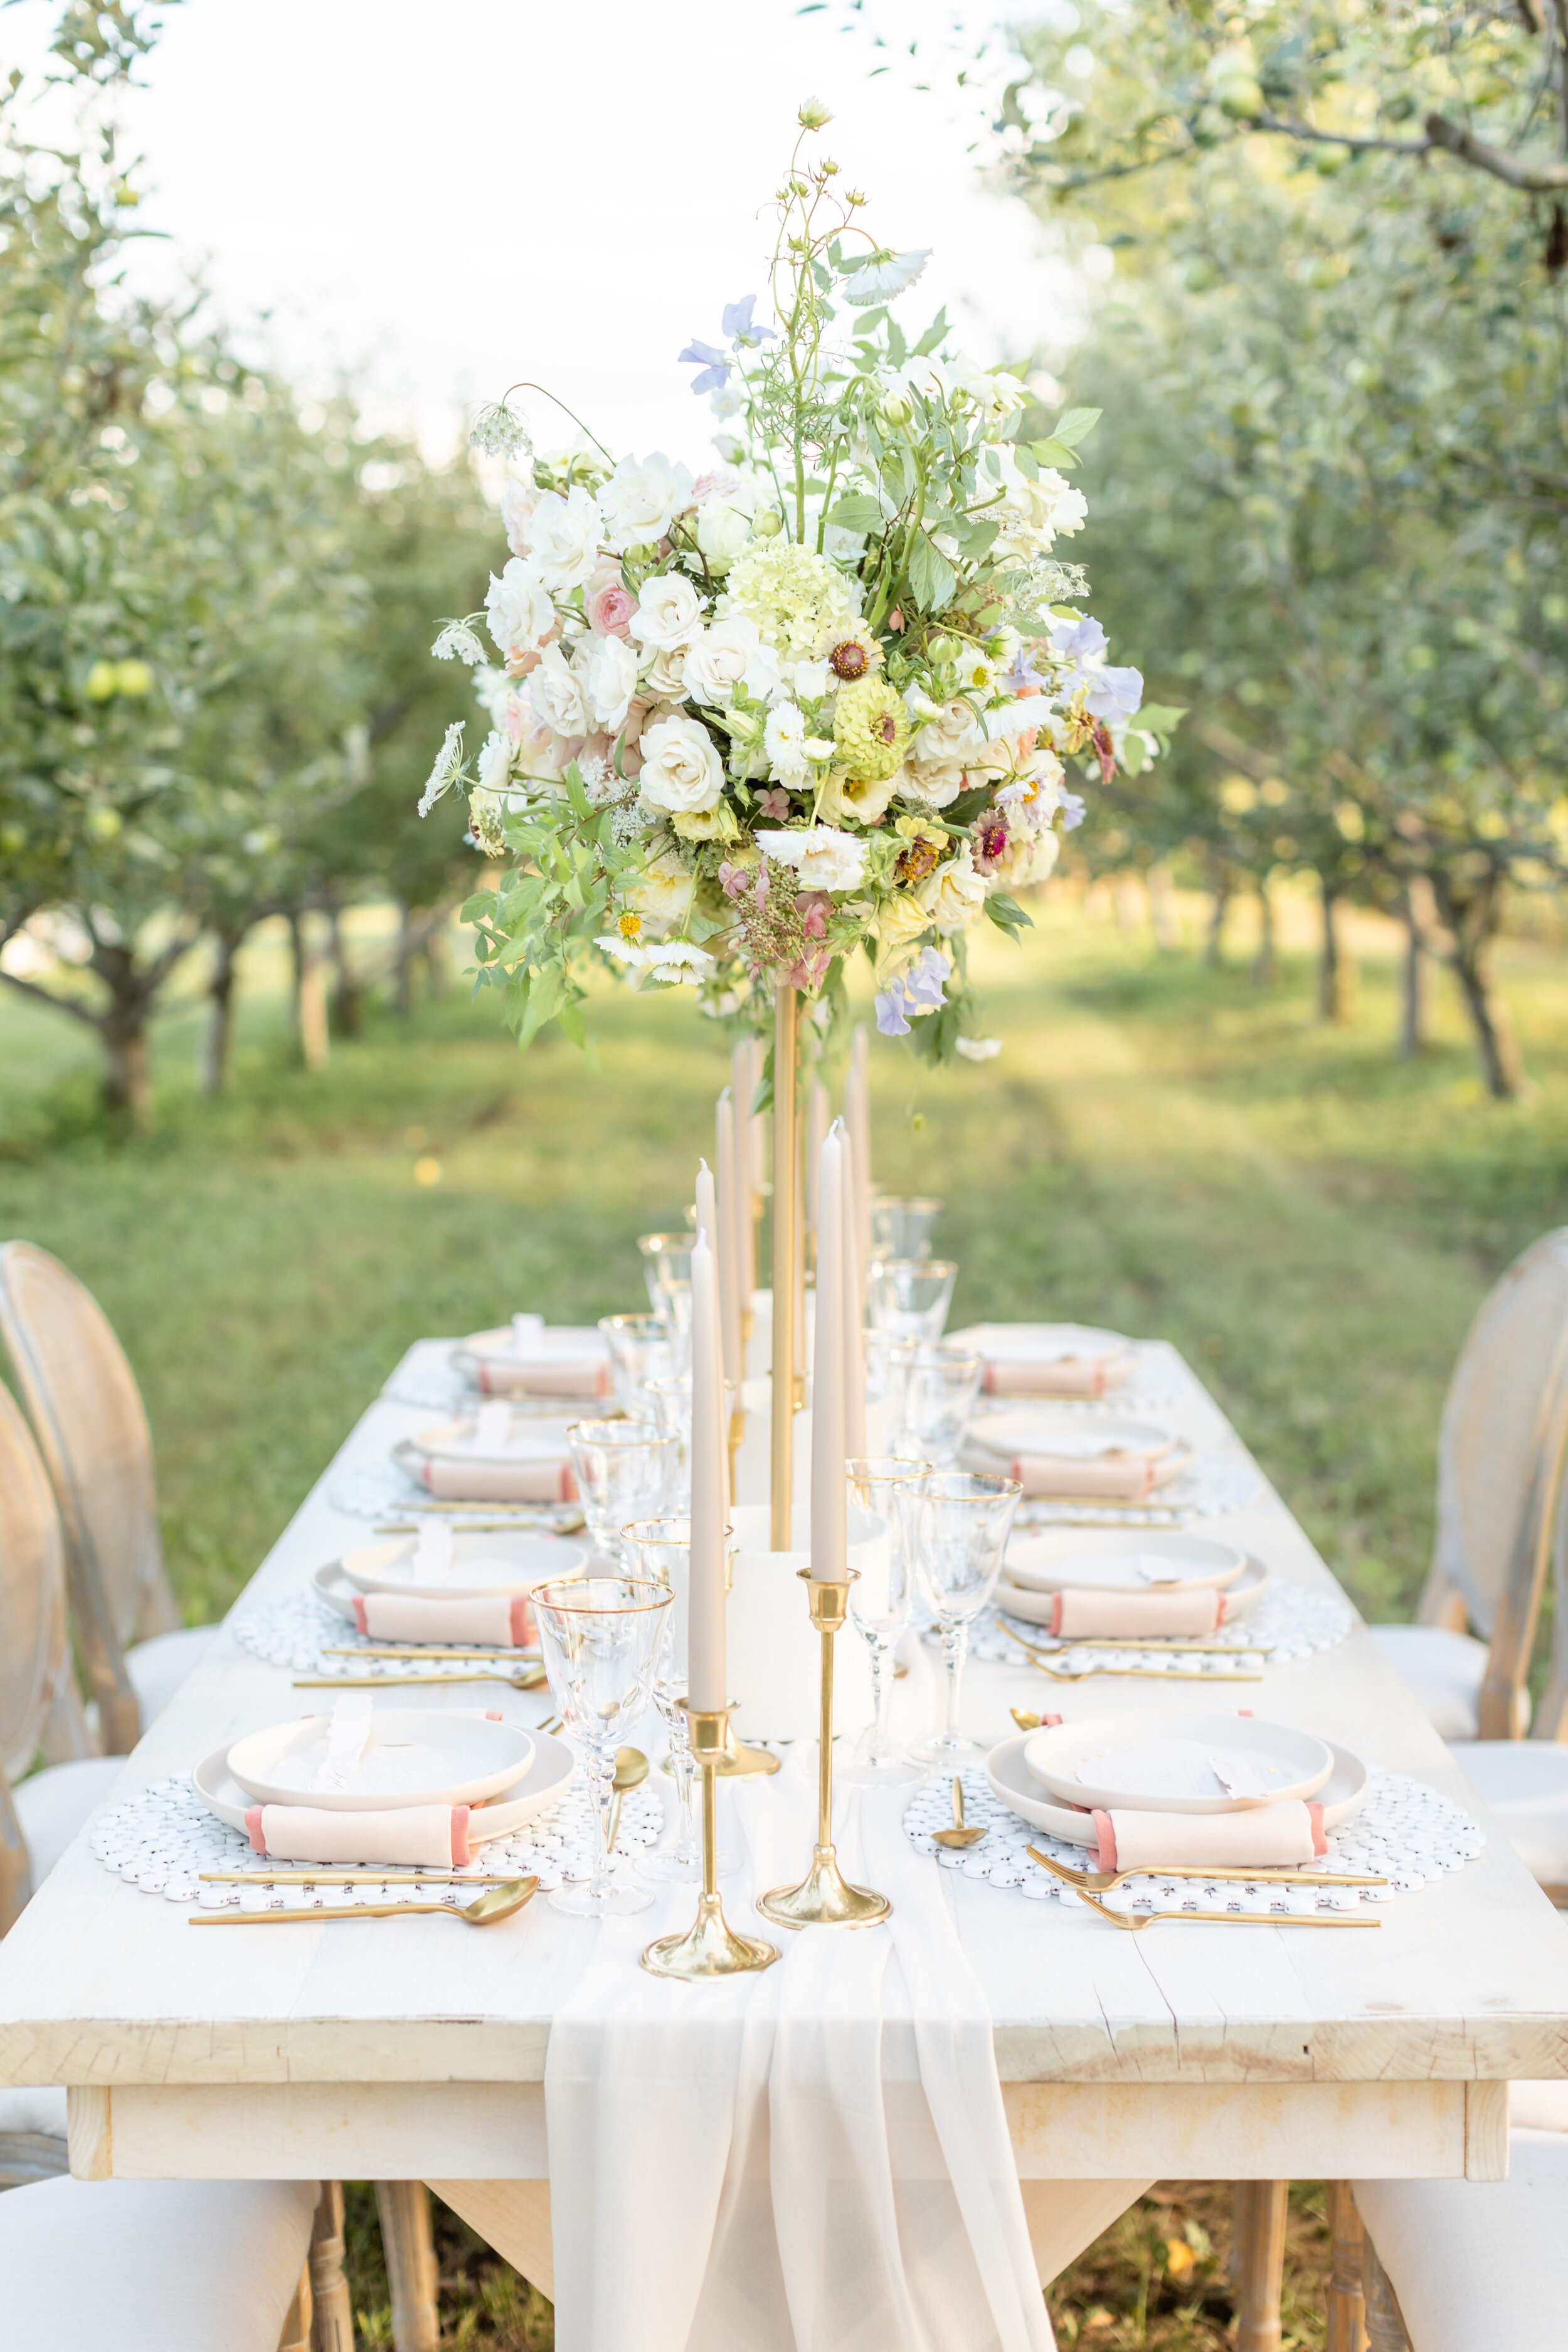 Delicate Luxe Micro-Wedding Inspired by Amalfis Lush, Romantic landscapes | Dylan & Sandra Photography -81.jpg